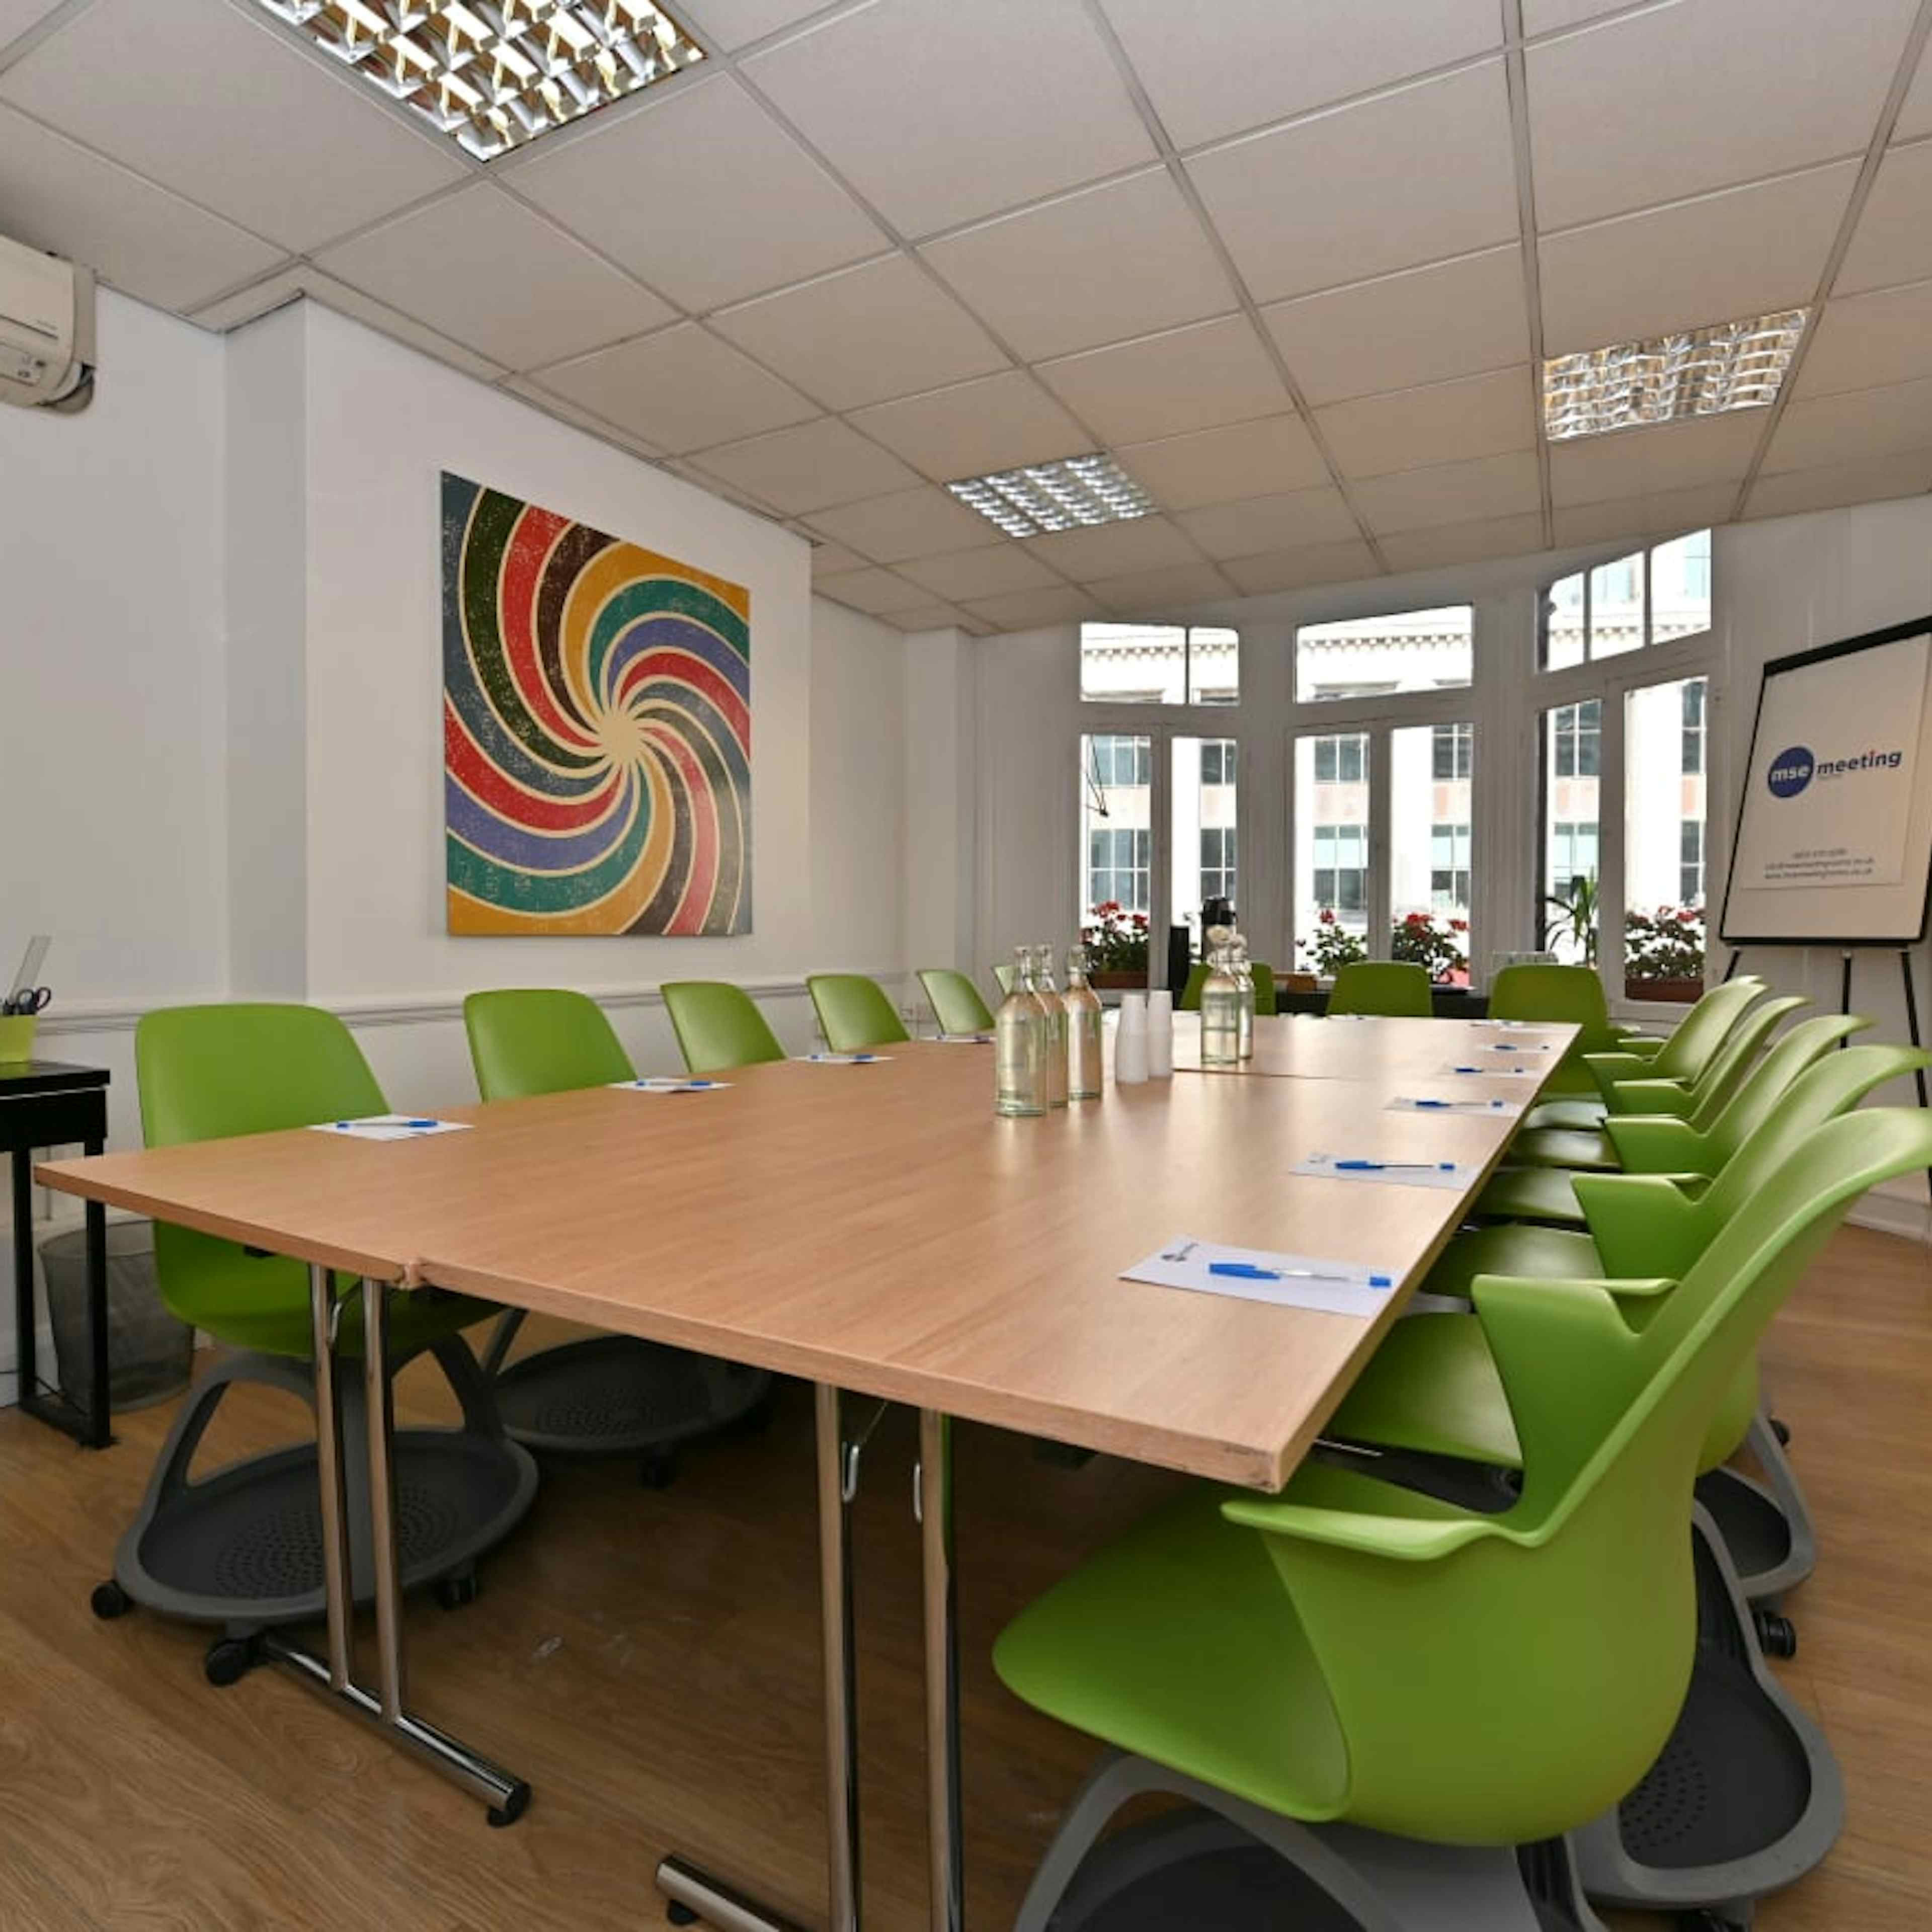 MSE Meeting Rooms - Tottenham Court Road - image 2